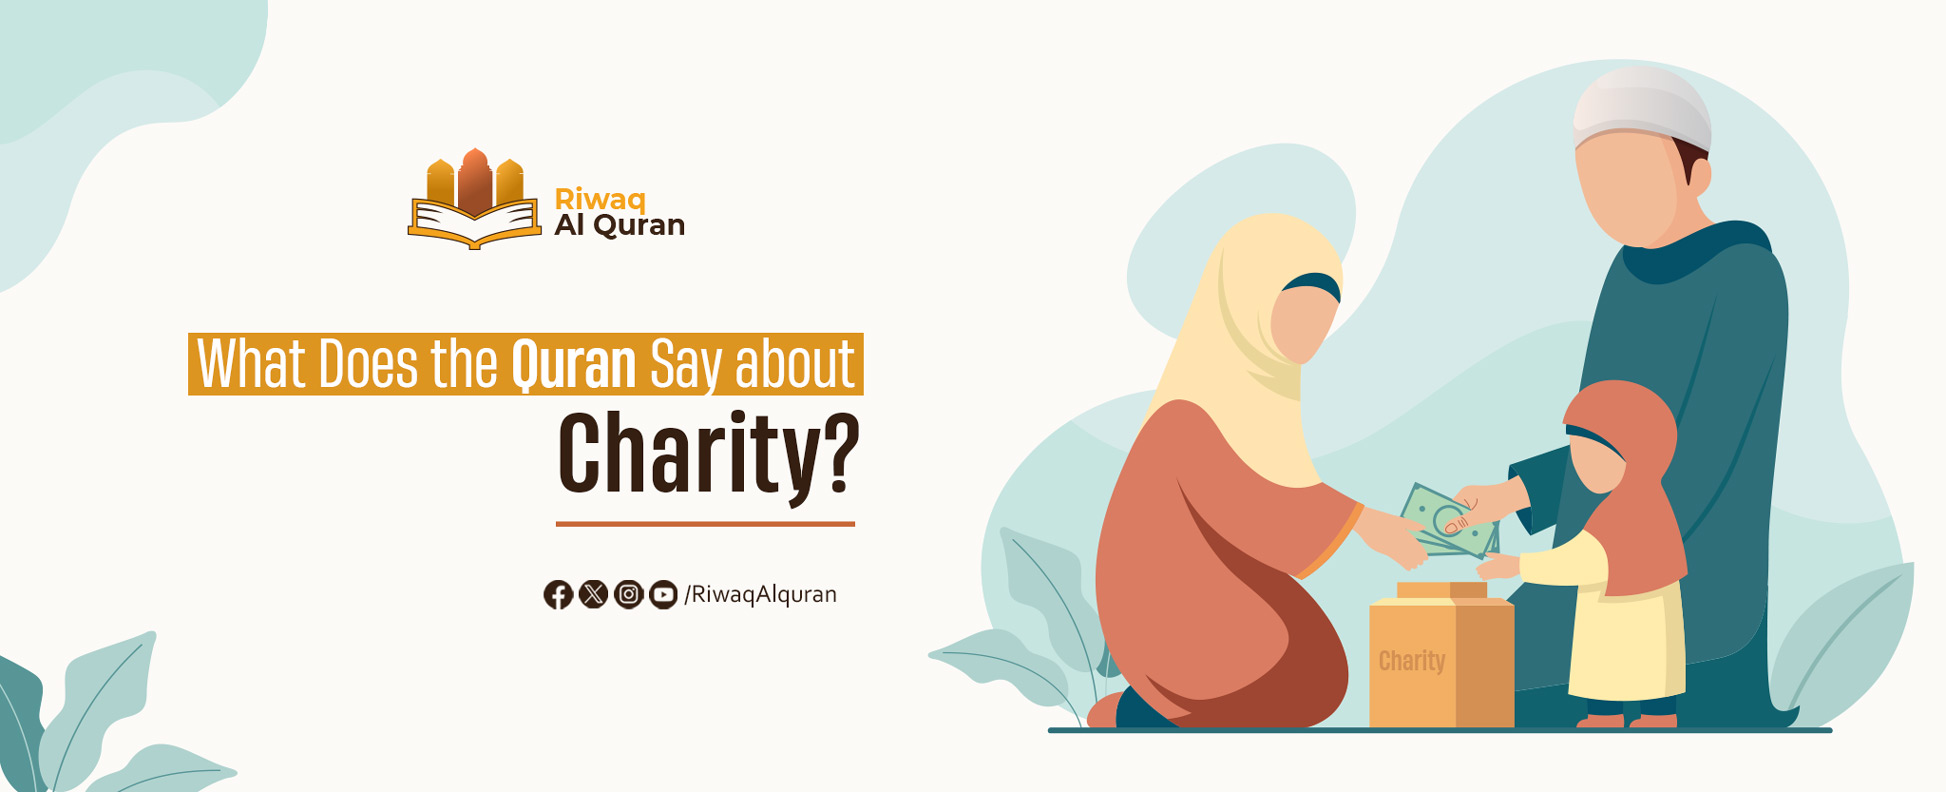 What Does the Quran Say About Charity?